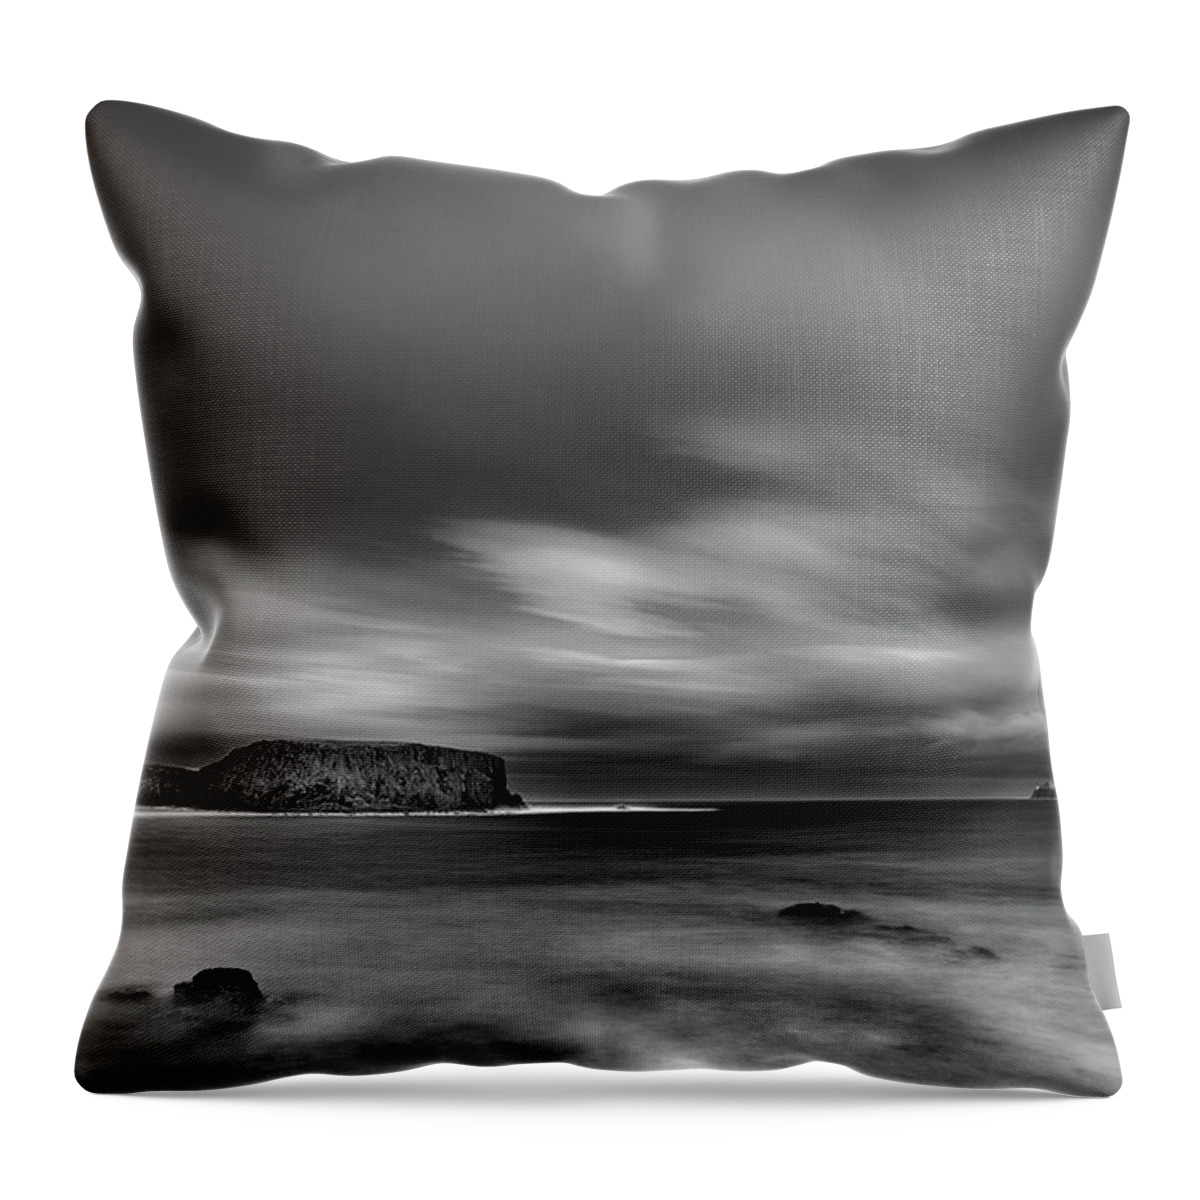 Sheep Throw Pillow featuring the photograph Sheep Island mono by Nigel R Bell